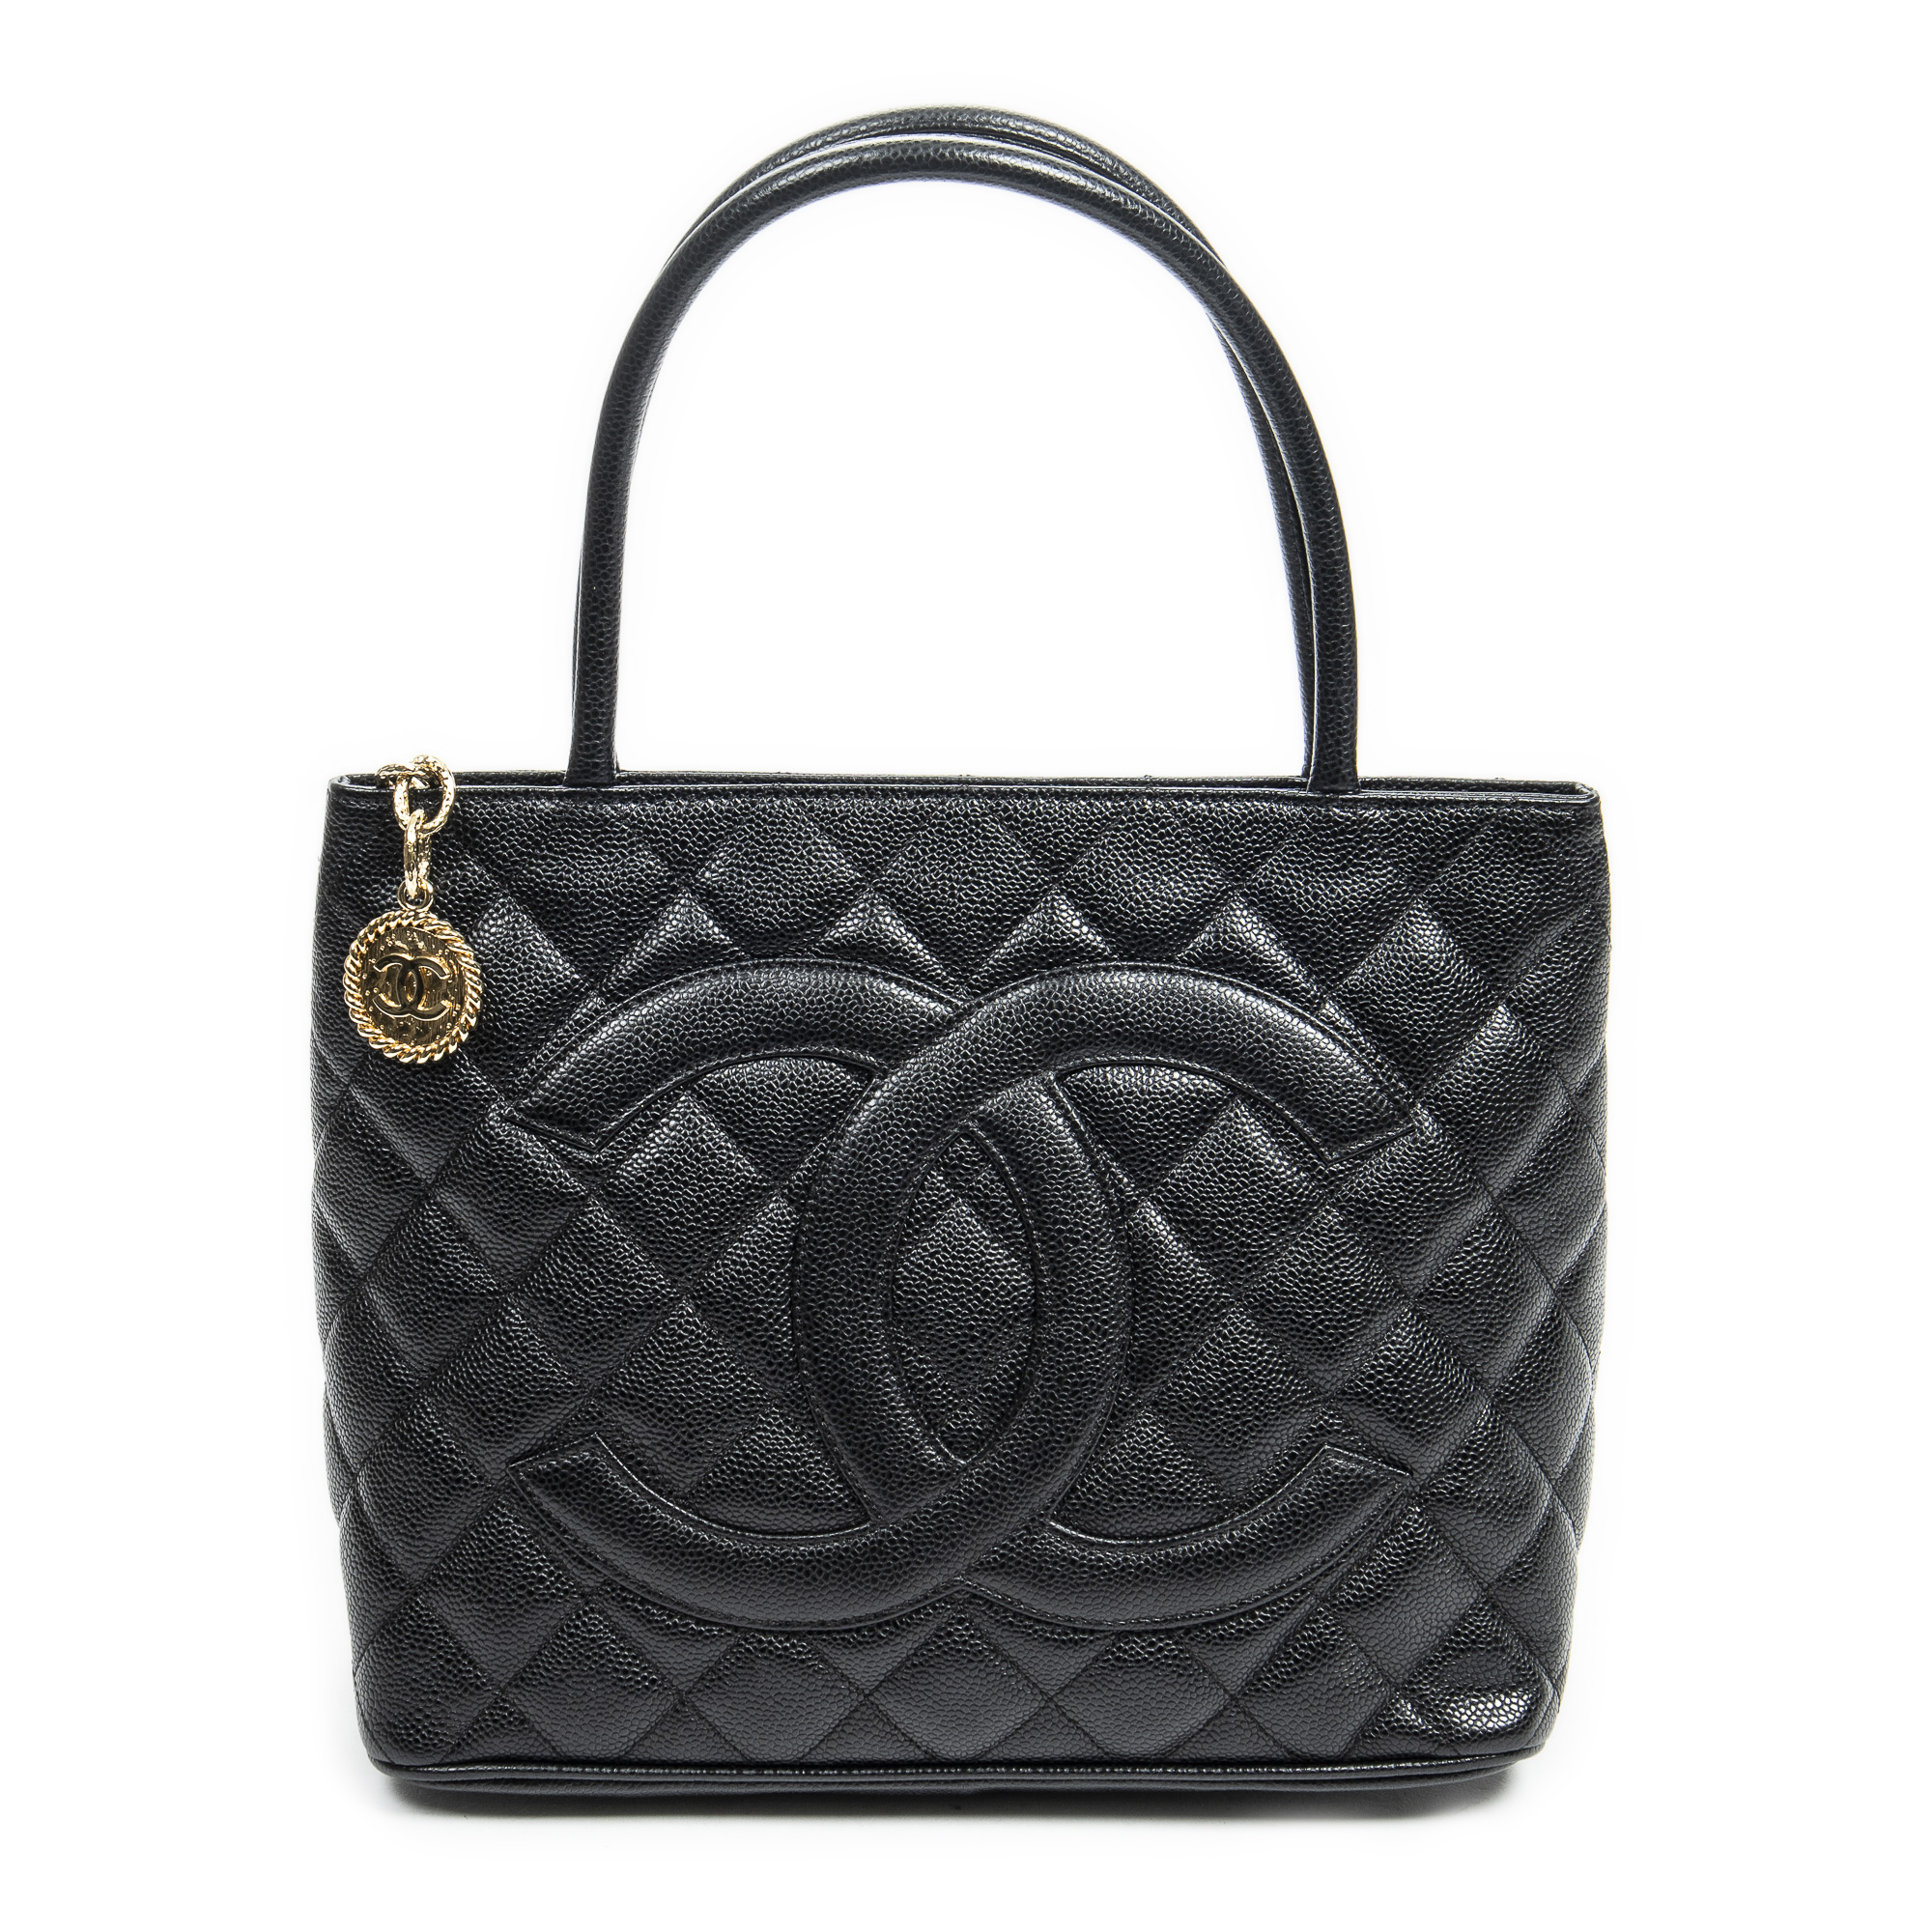 CHANEL Medallion Tote Bag in Black Caviar with Gold Hardware 2003